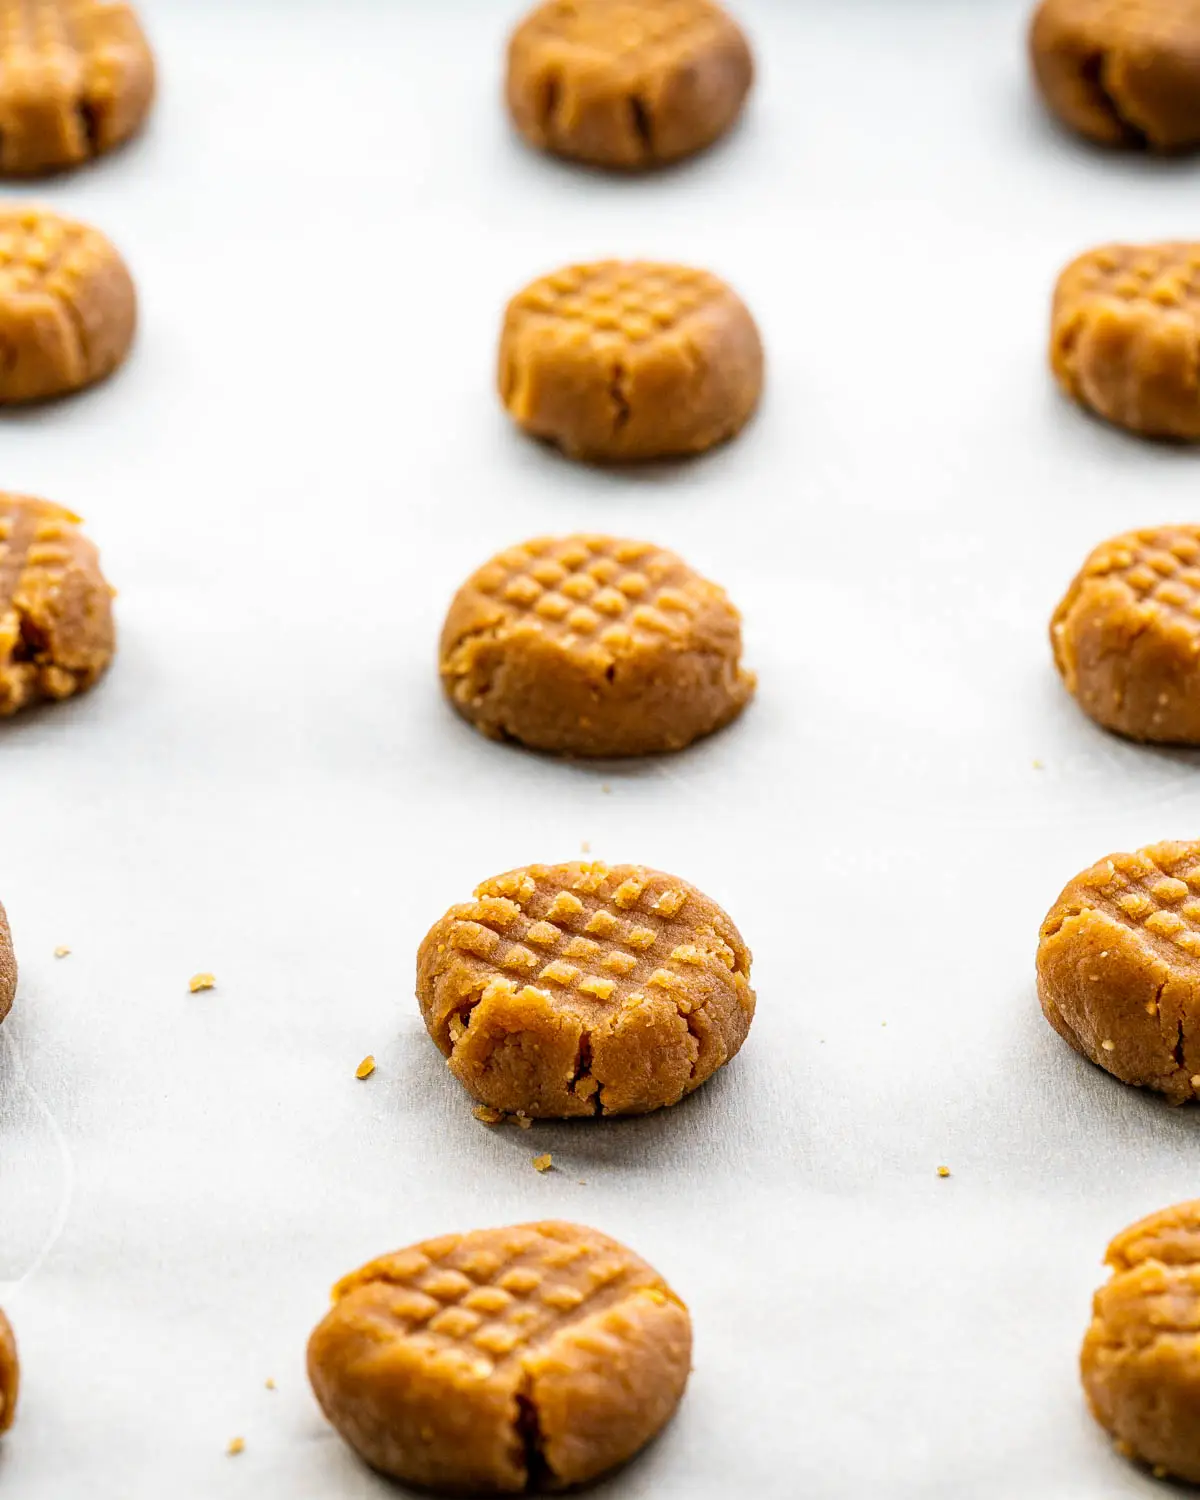 peanut butter cookies on a baking sheet ready to go in the oven.